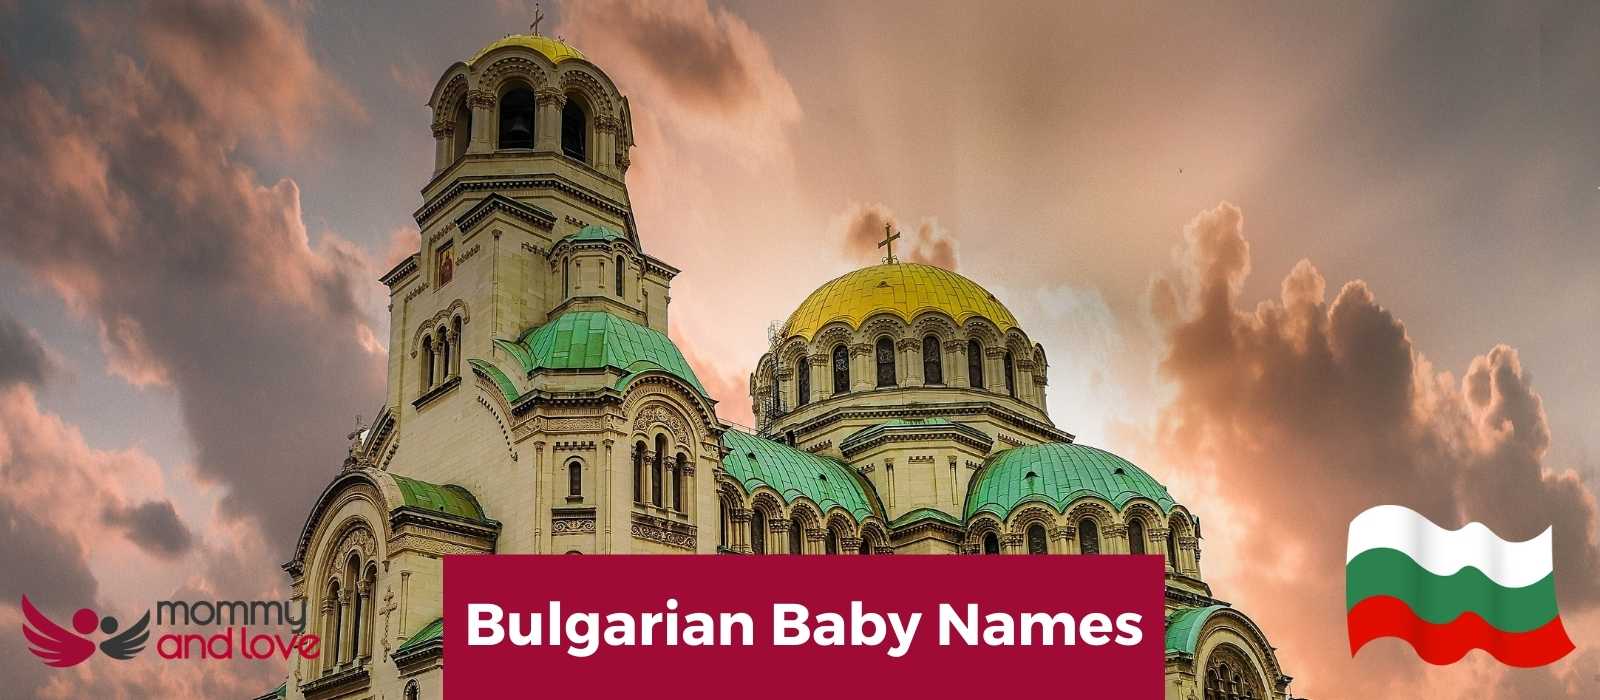 Bulgarian Baby Names The Most Beautiful and Unique Names for Your Little One